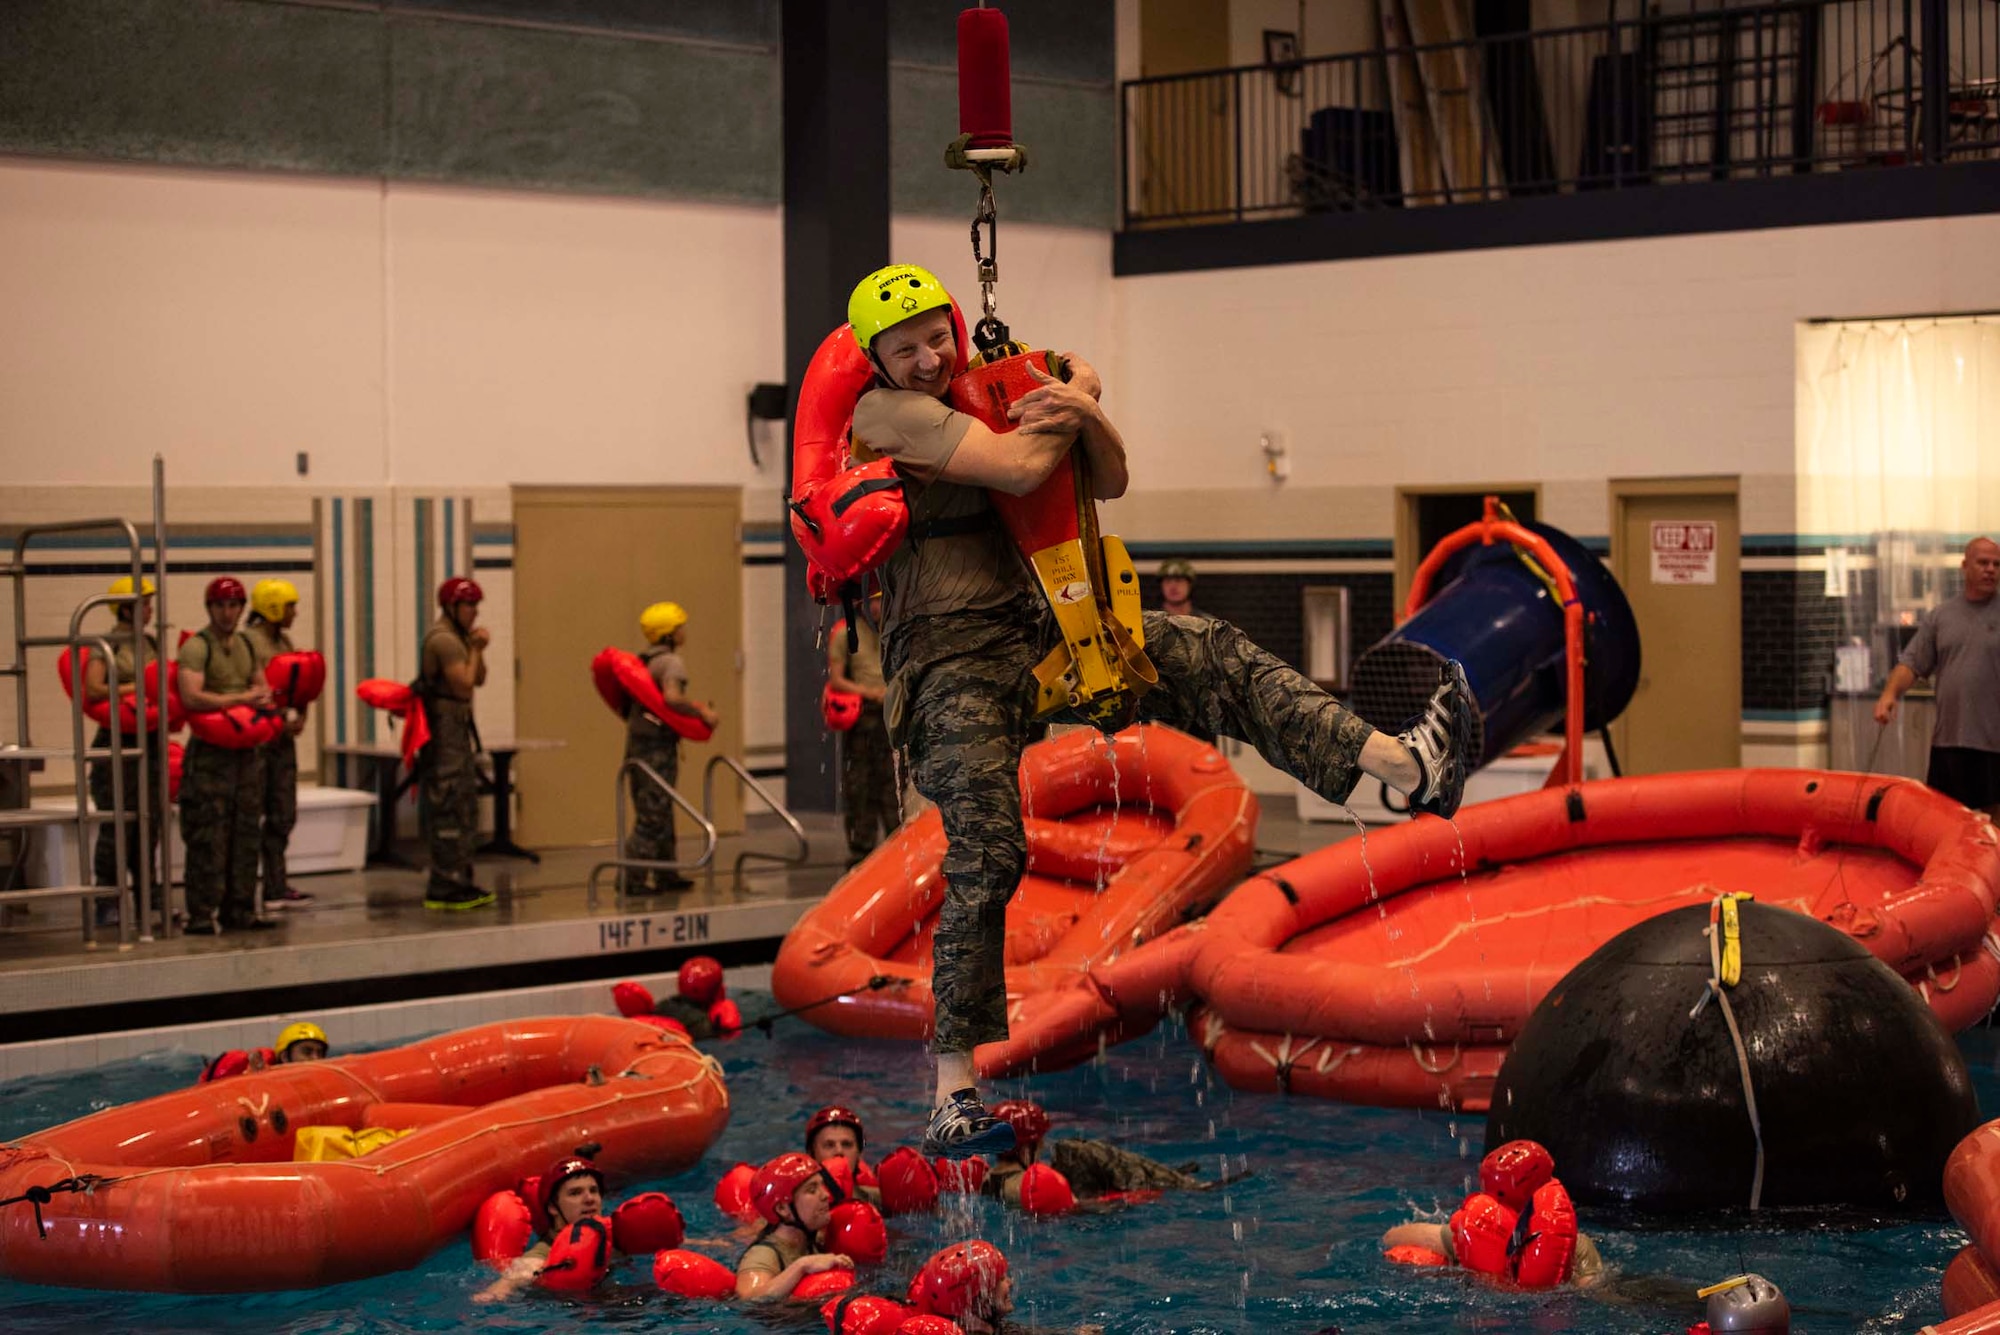 Staff Sgt. Mikhail Scheglov, a finance technician with the 141st Comptroller Flight, smiles as he’s hoisted out of the pool during SV-90A parachute water survival training Aug. 2, 2018 at Fairchild Air Force Base, Wash. Scheglov completed several Survival, Evasion, Resistance and Escape training courses in preparation for a trip to Vinnytsia Air Base, Ukraine, in which he served as a translator during exercise Clear Sky 2018. (U.S. Air National Guard photo by Staff Sgt. Rose M. Lust)